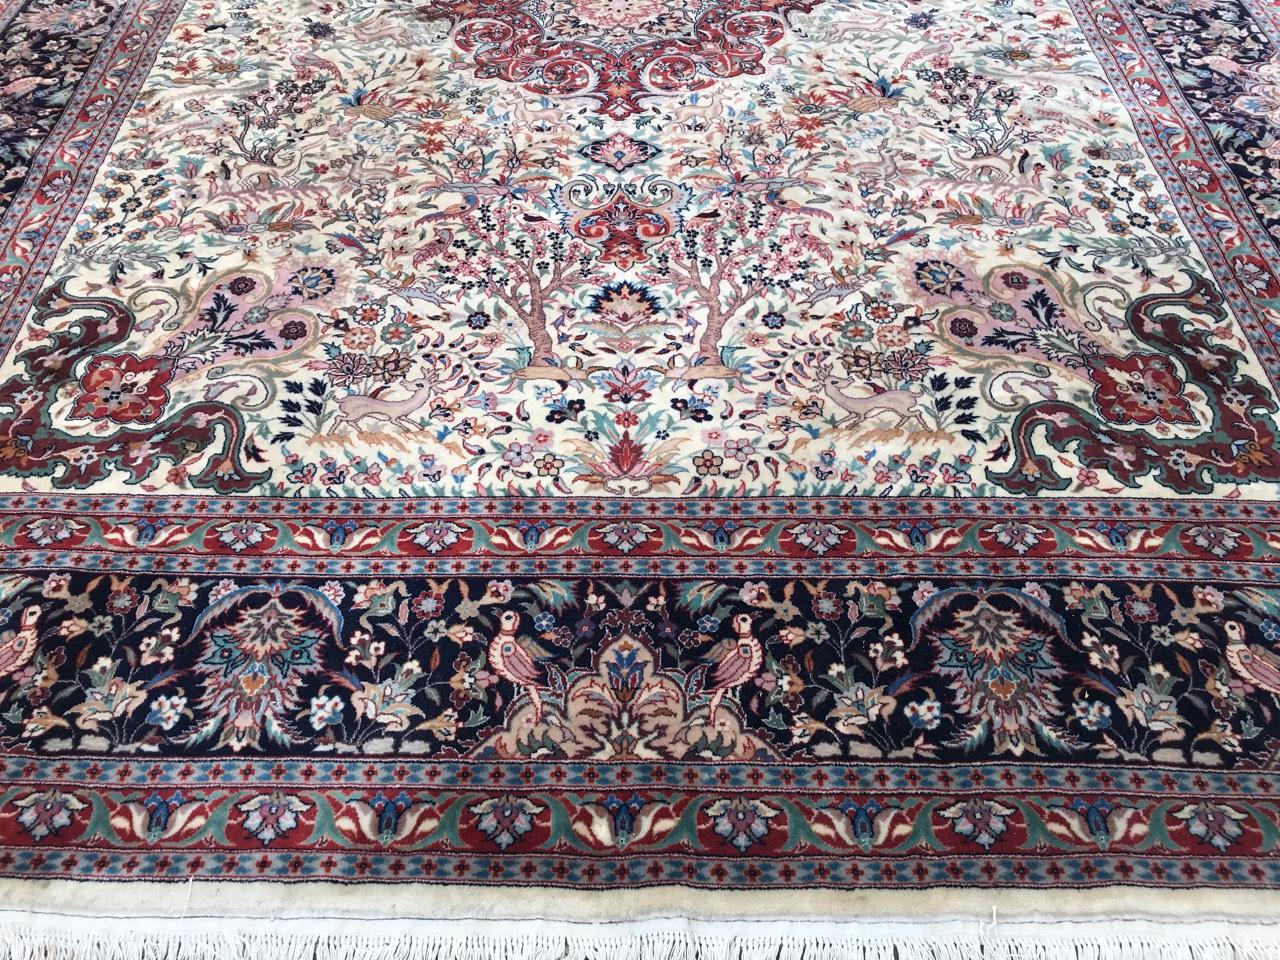 Exquisite large rug featuring a stunning design with a central medallion. Beautifully hand-knotted with wool velvet on a cotton foundation, this rug boasts vibrant colors including red, pink, green, yellow, and blue. The light field showcases a